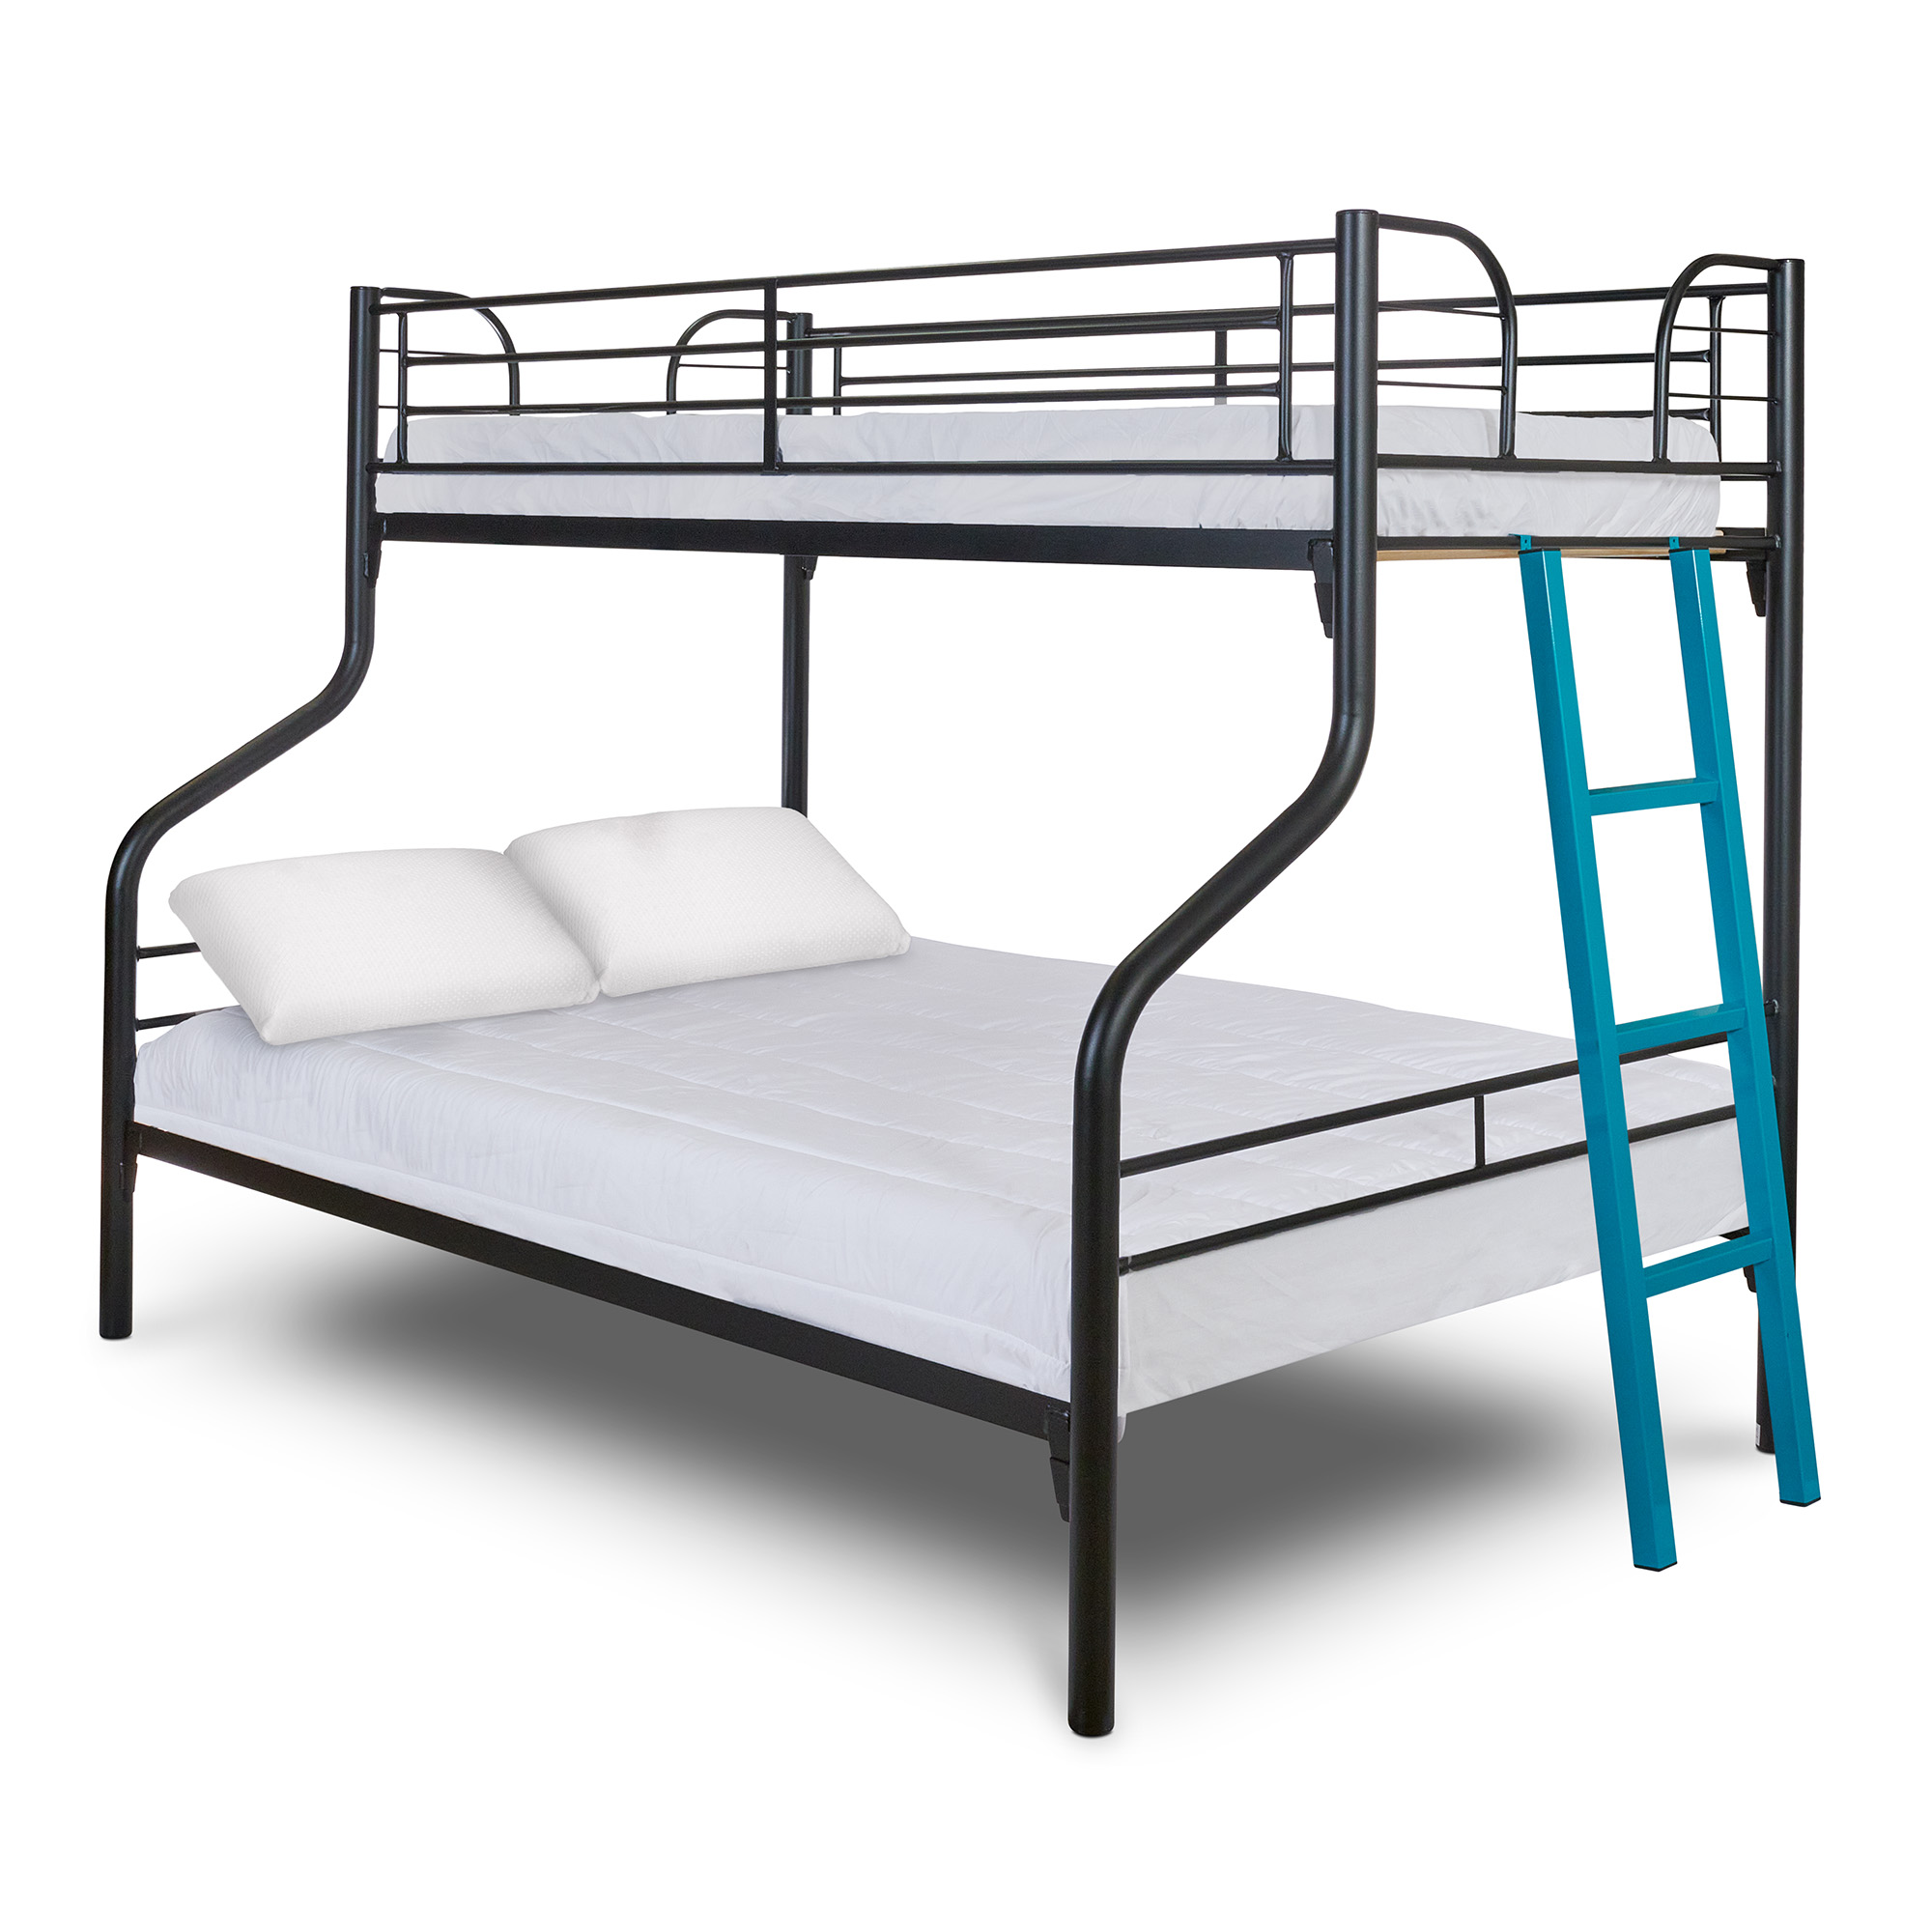 Archer Single Over Double Bunk Bed, Single Over Double Bunk Bed